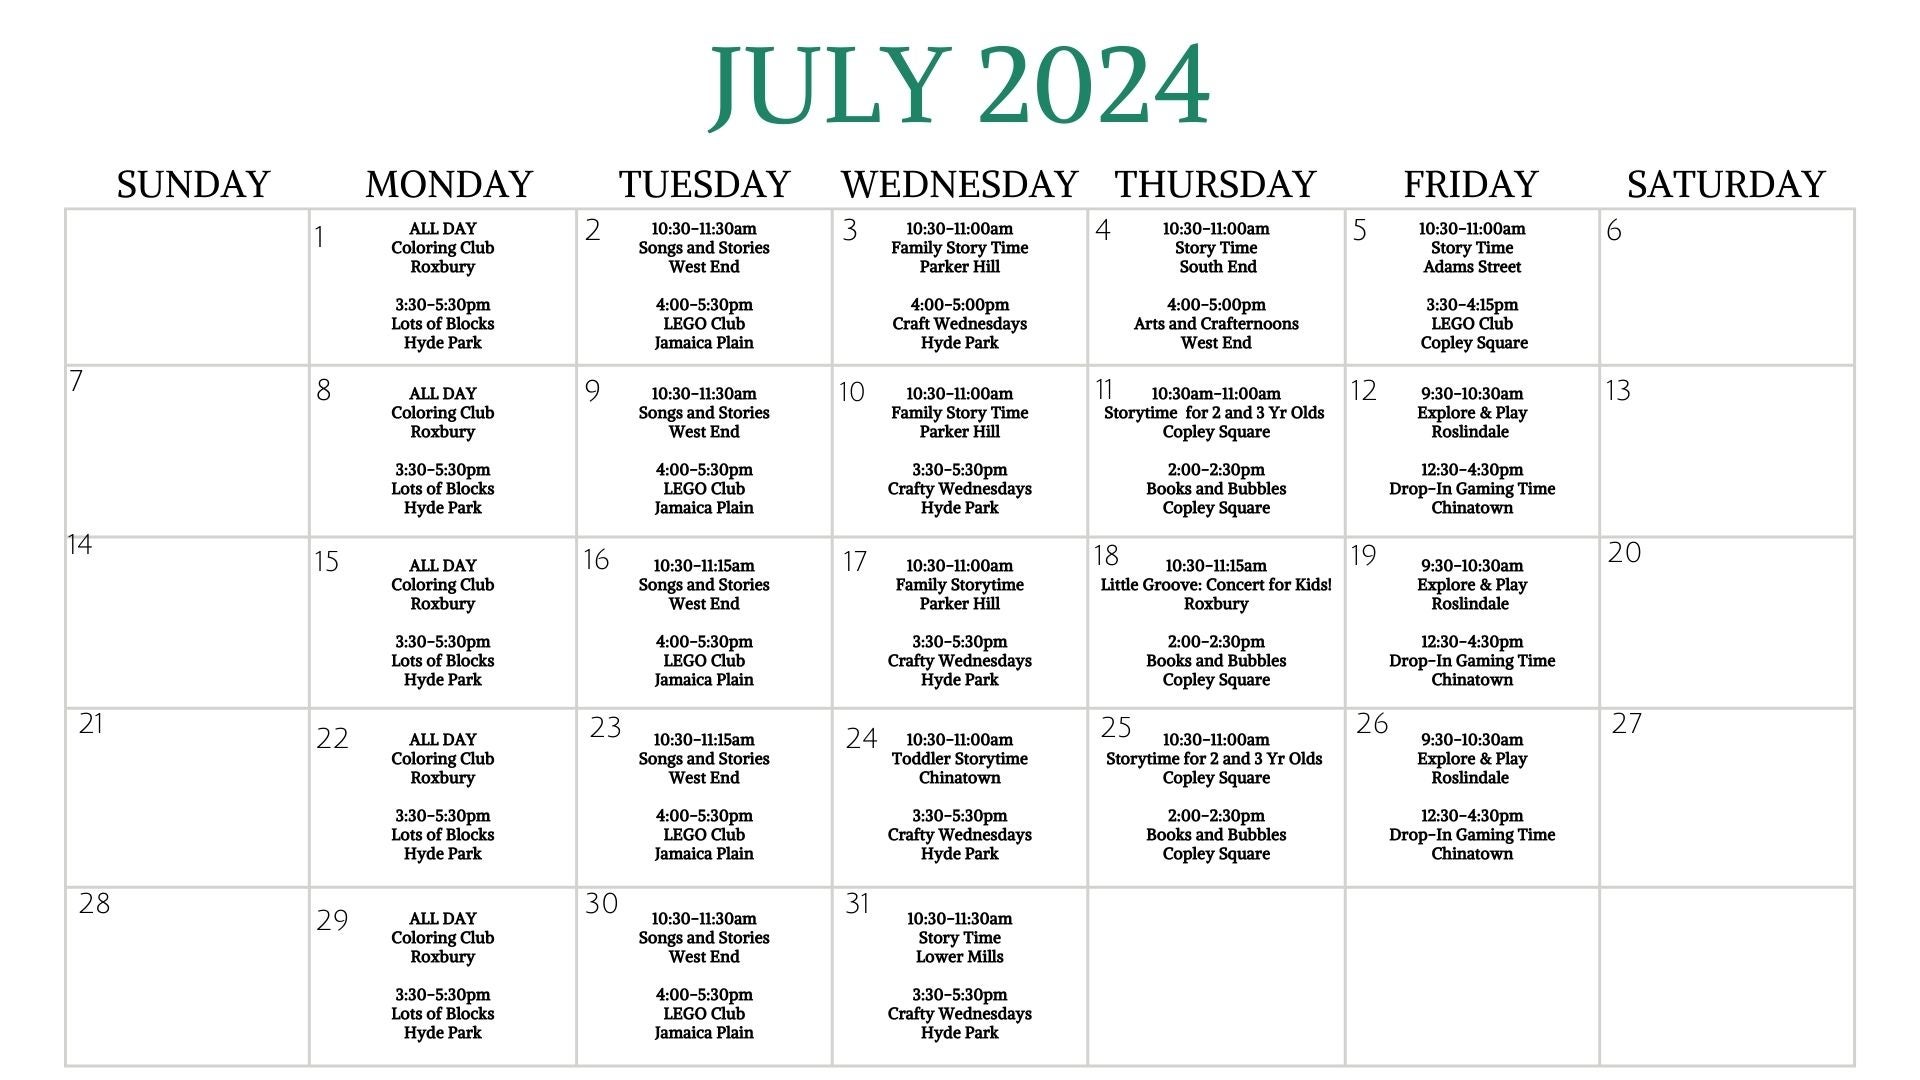 July 2024 Calendar with BPL events